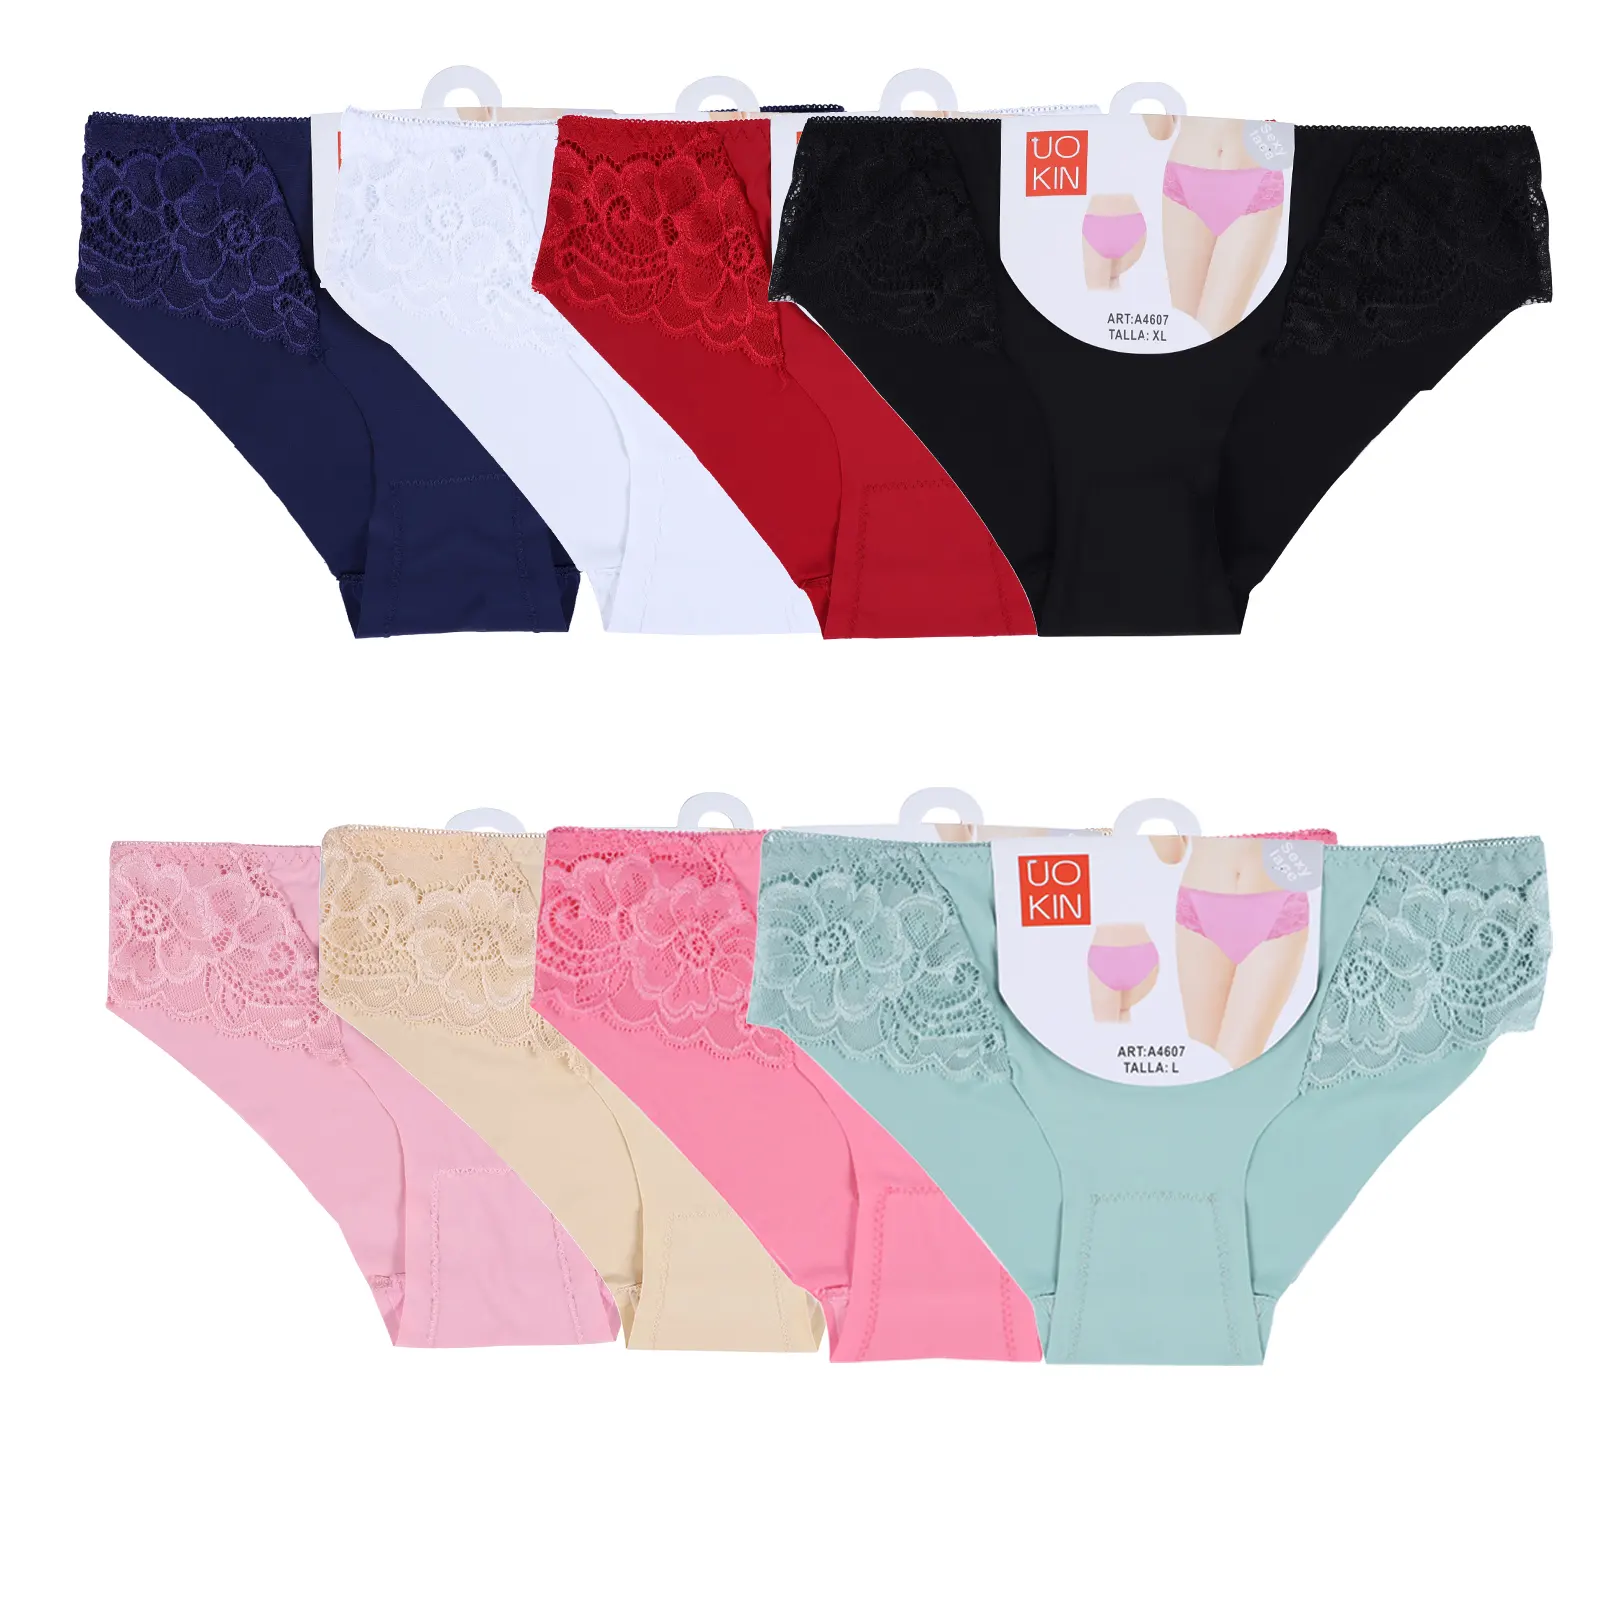 Sexy Panties Women Underwear Lace Briefs UOKIN Lingeries Seamless Panty Plus Size Shorts Underpant Lady Girl Pant